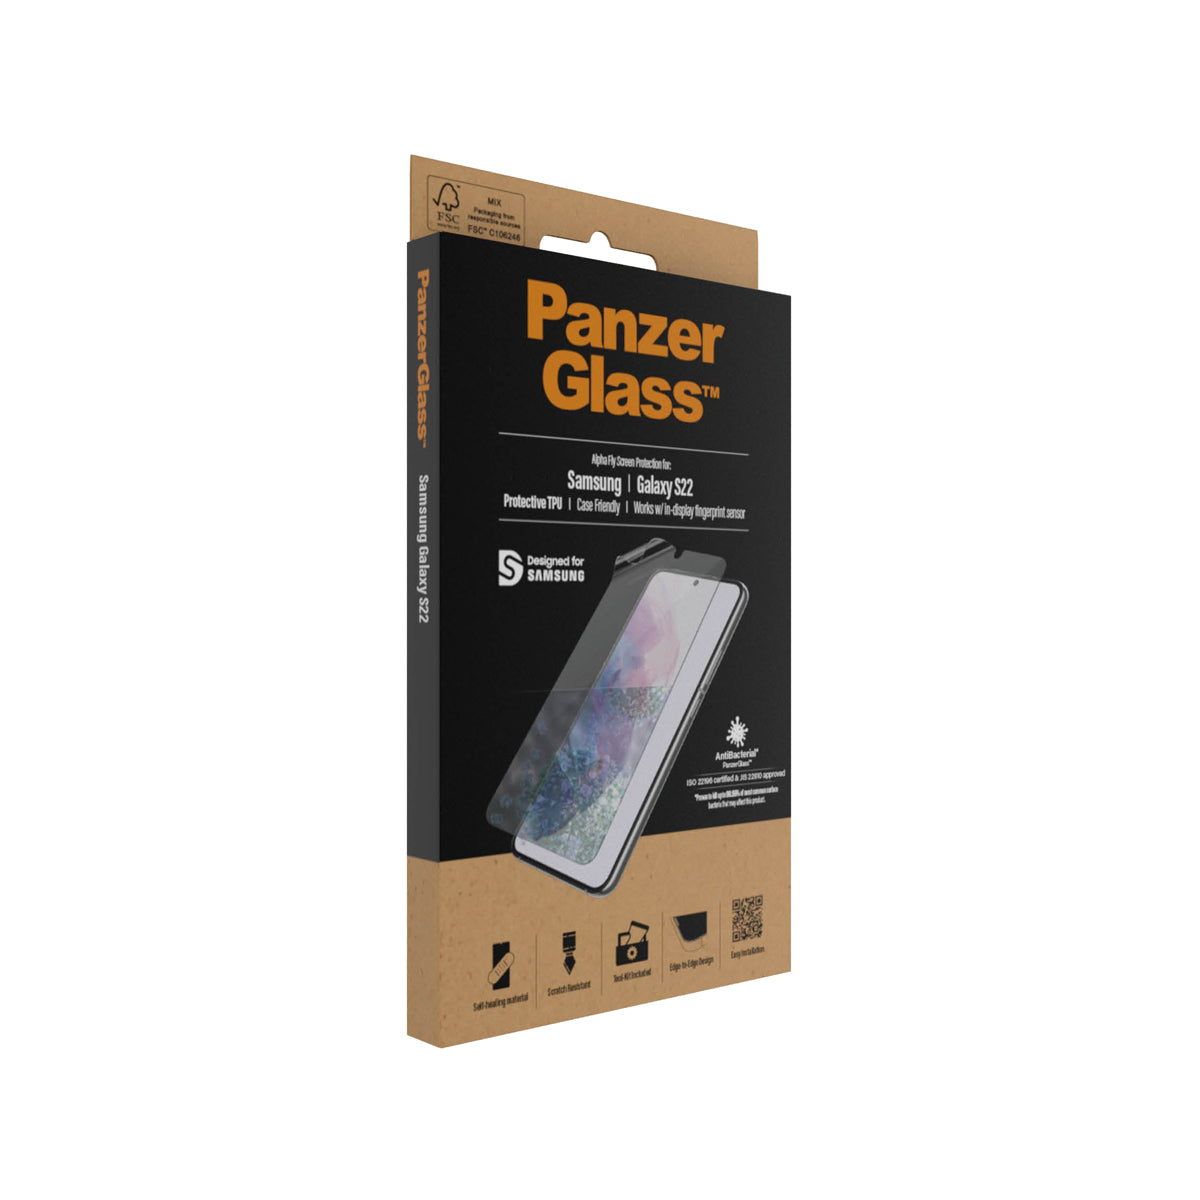 PanzerGlass TPU Antibacterial Phone Screen Pprotector for Samsung GS22 - Clear.